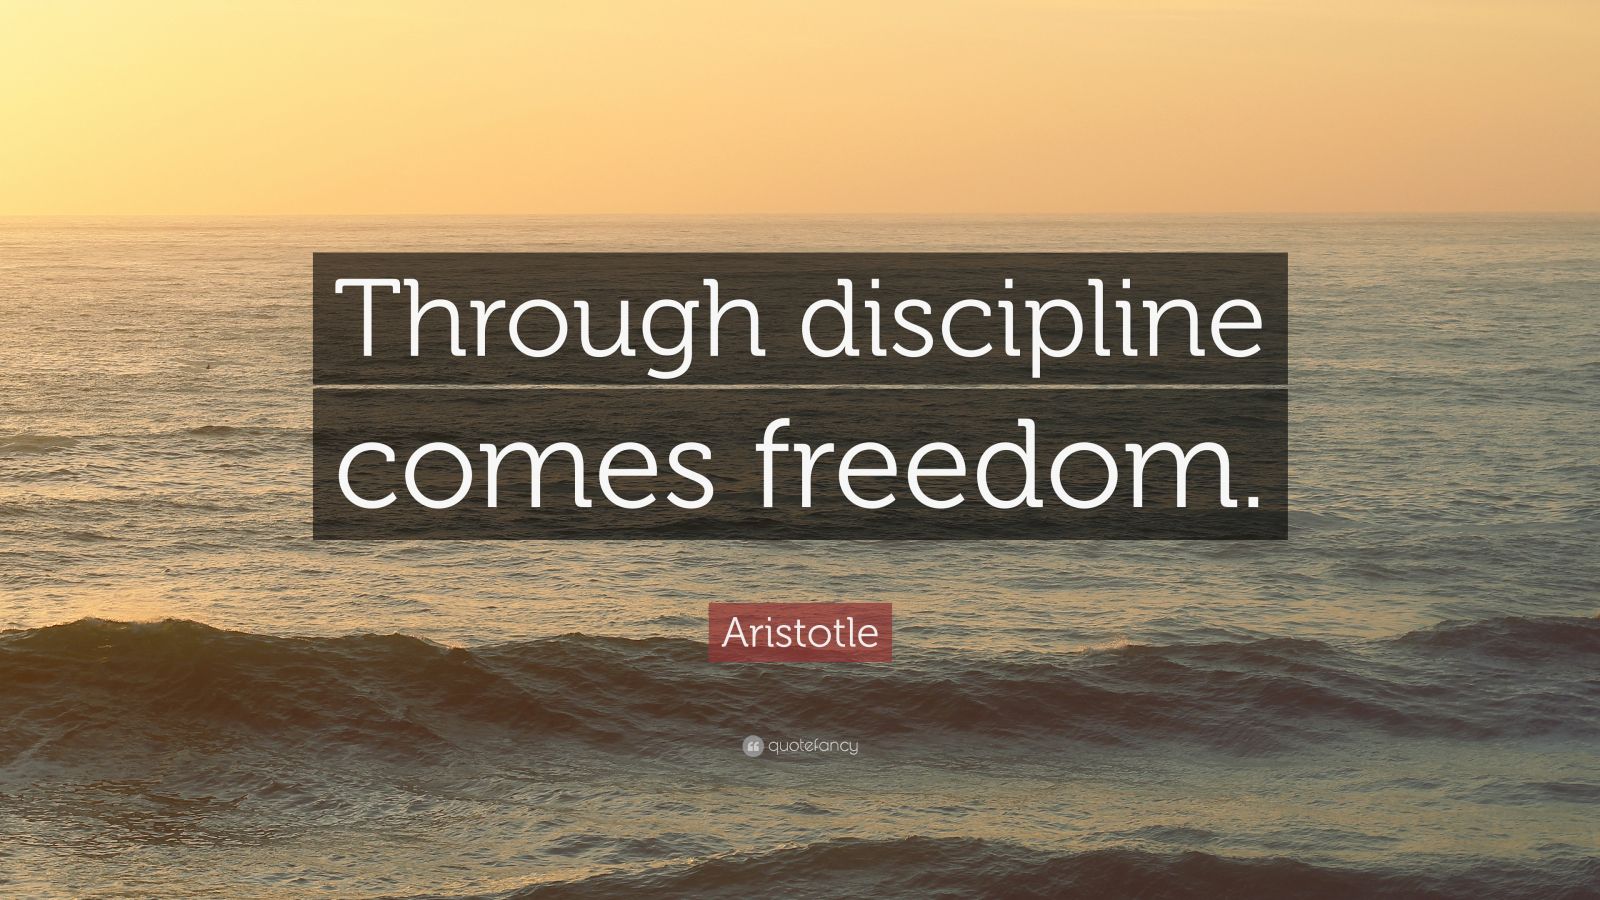 Aristotle Quote: “Through discipline comes freedom.” (33 wallpapers